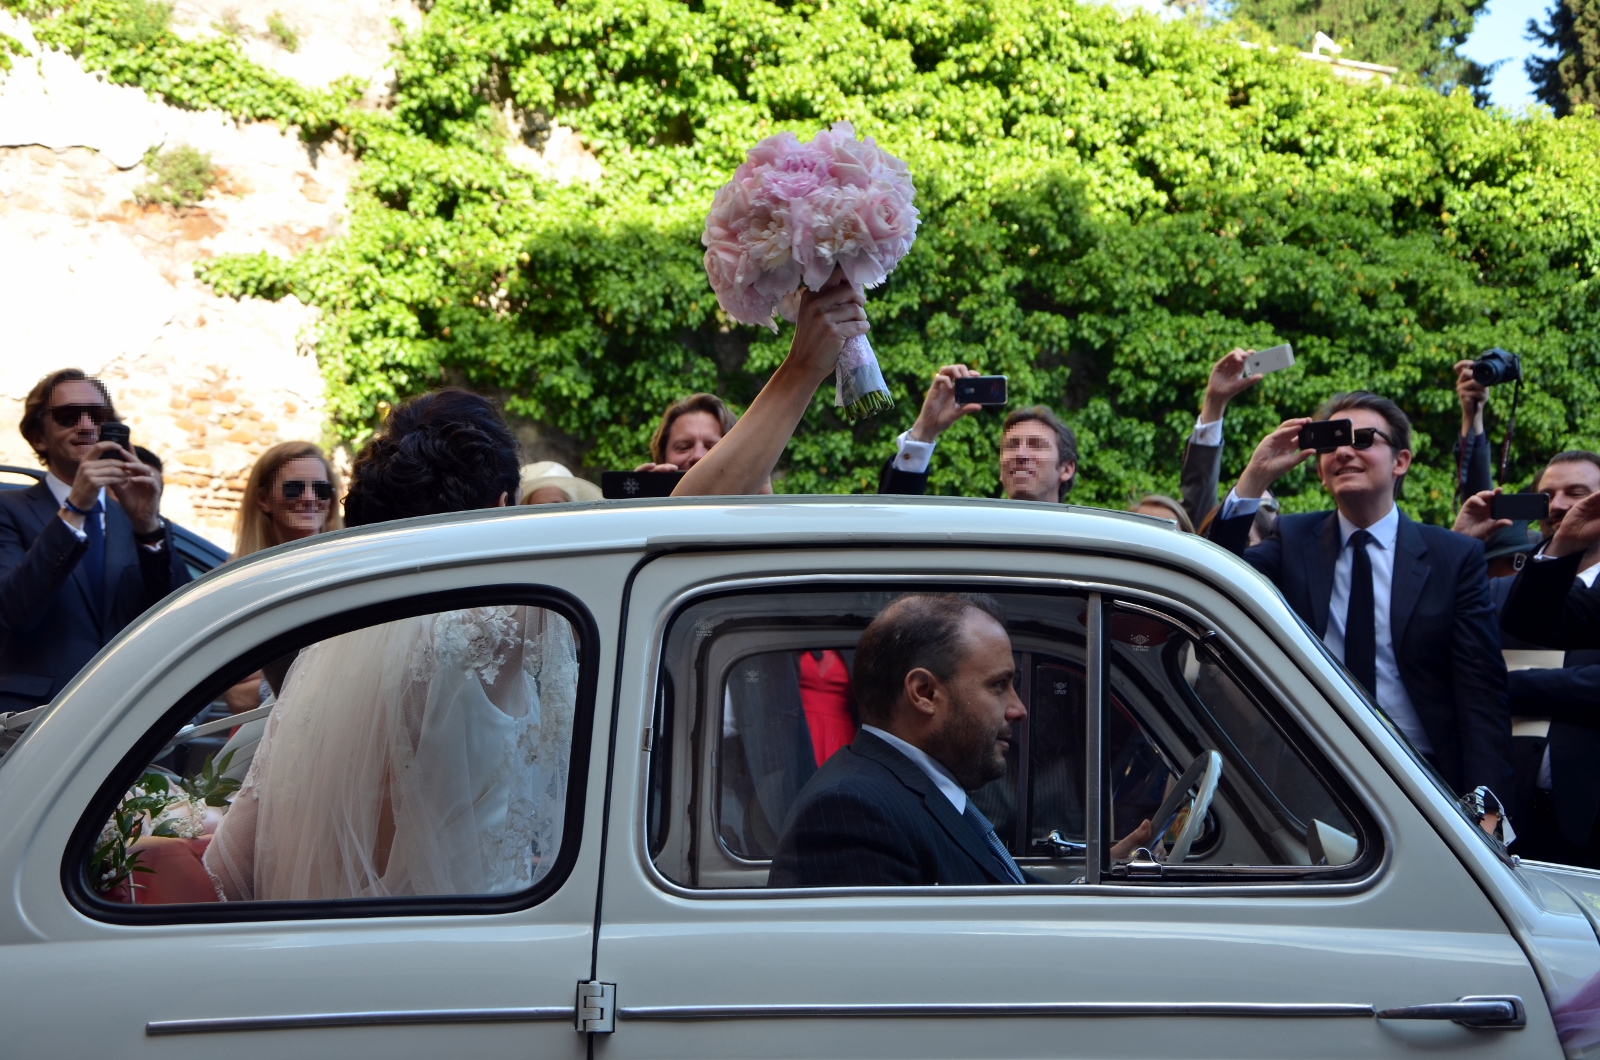 A Spring Wedding in Rome